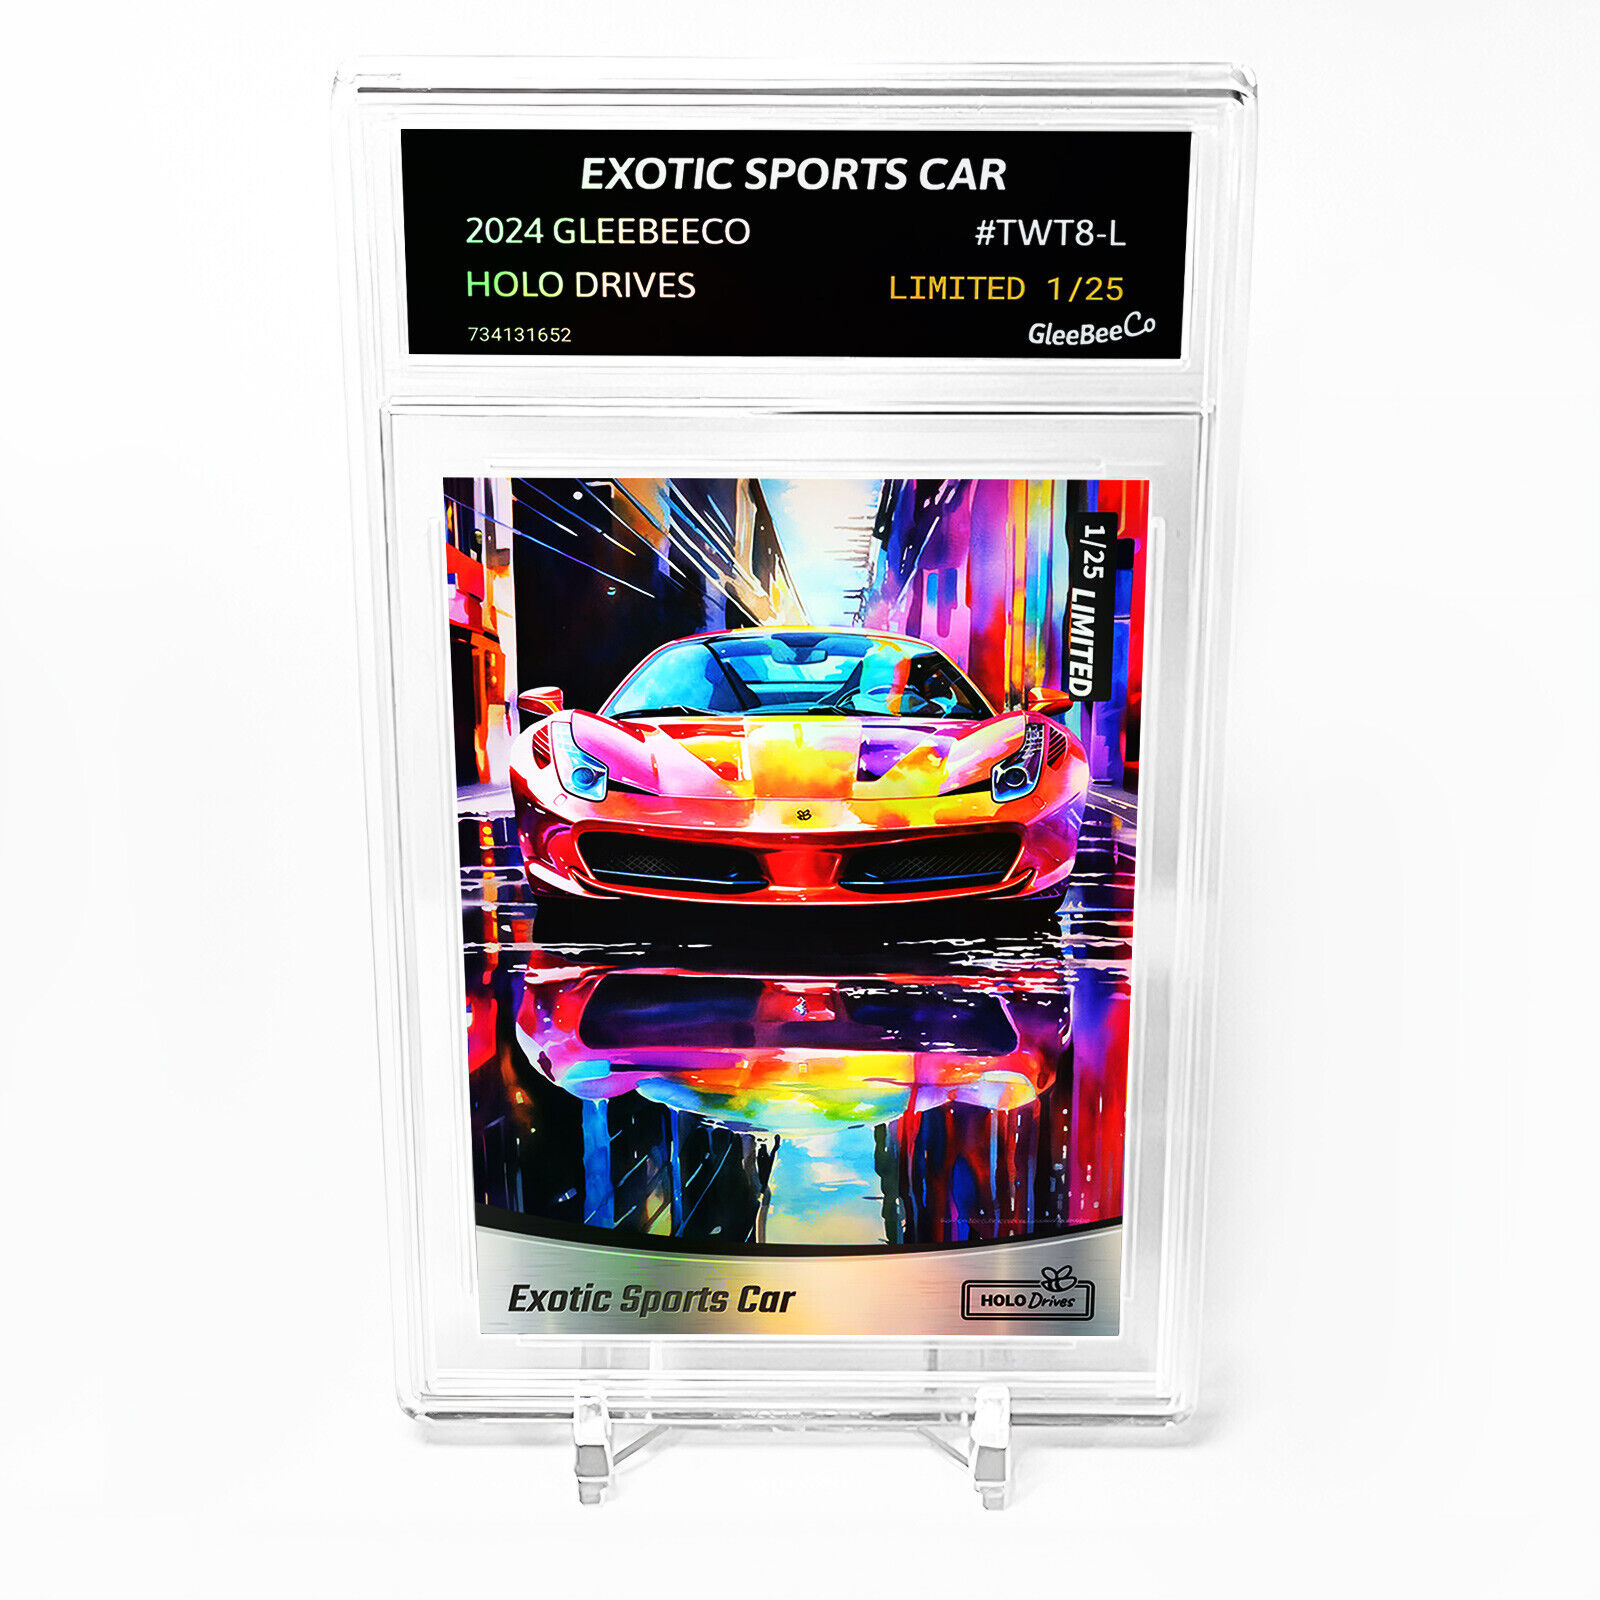 EXOTIC SPORTS CAR Card GleeBeeCo Holo Drives Watercolor #TWT8-L Limited to /25